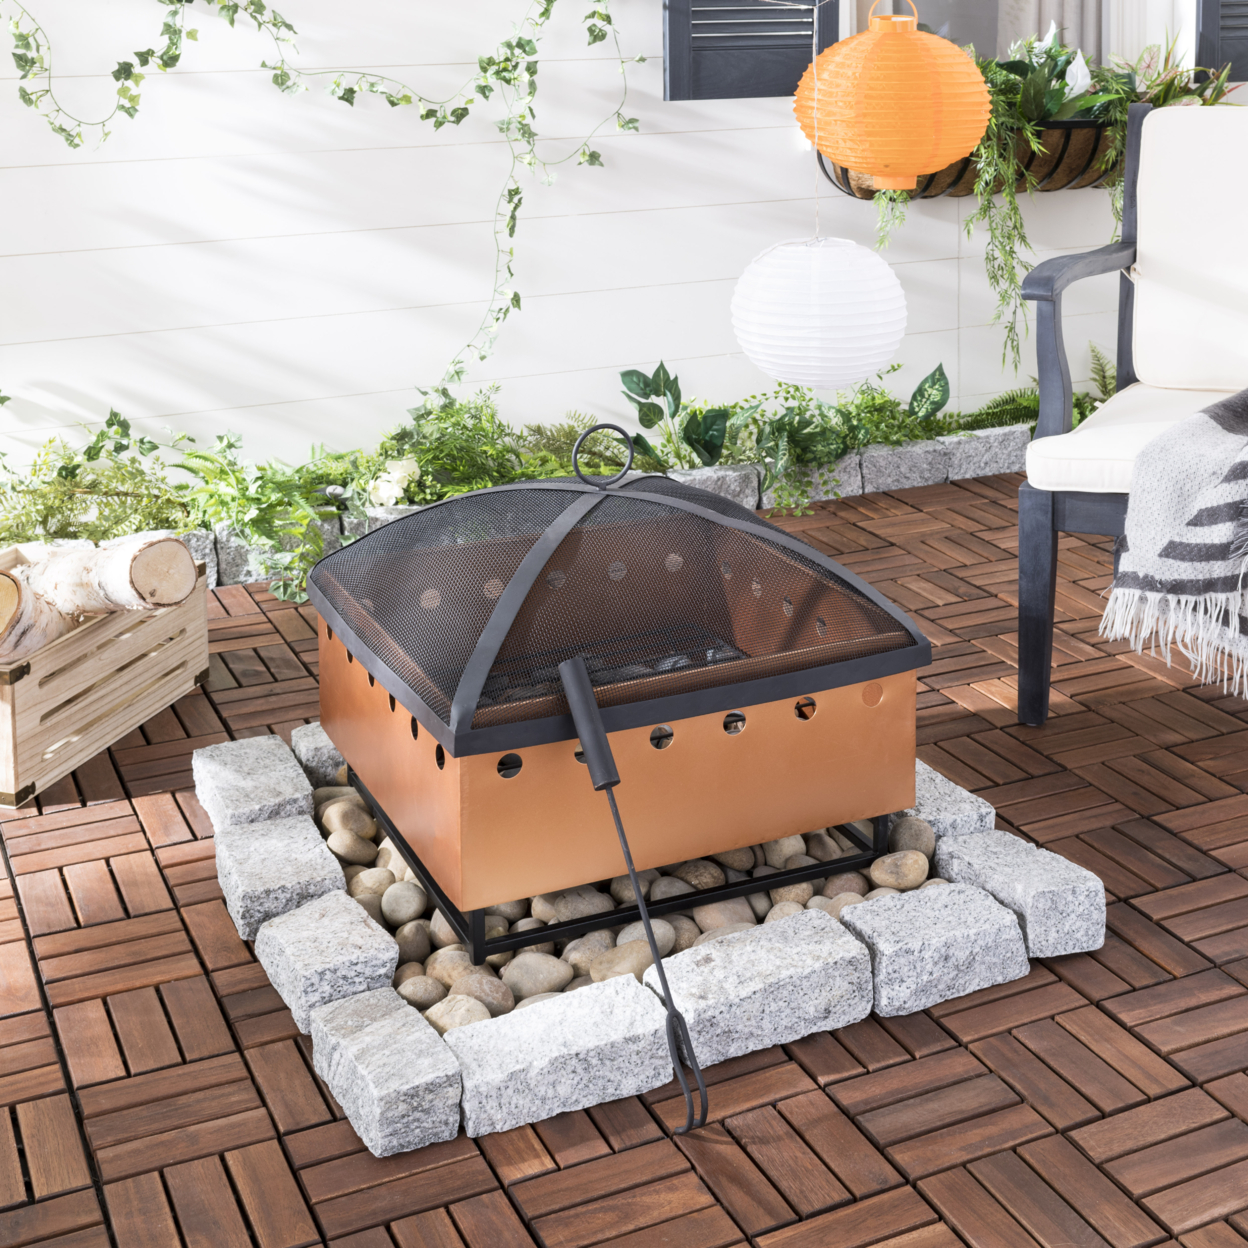 SAFAVIEH Outdoor Collection Wyatt Square Fire Pit Copper/Black